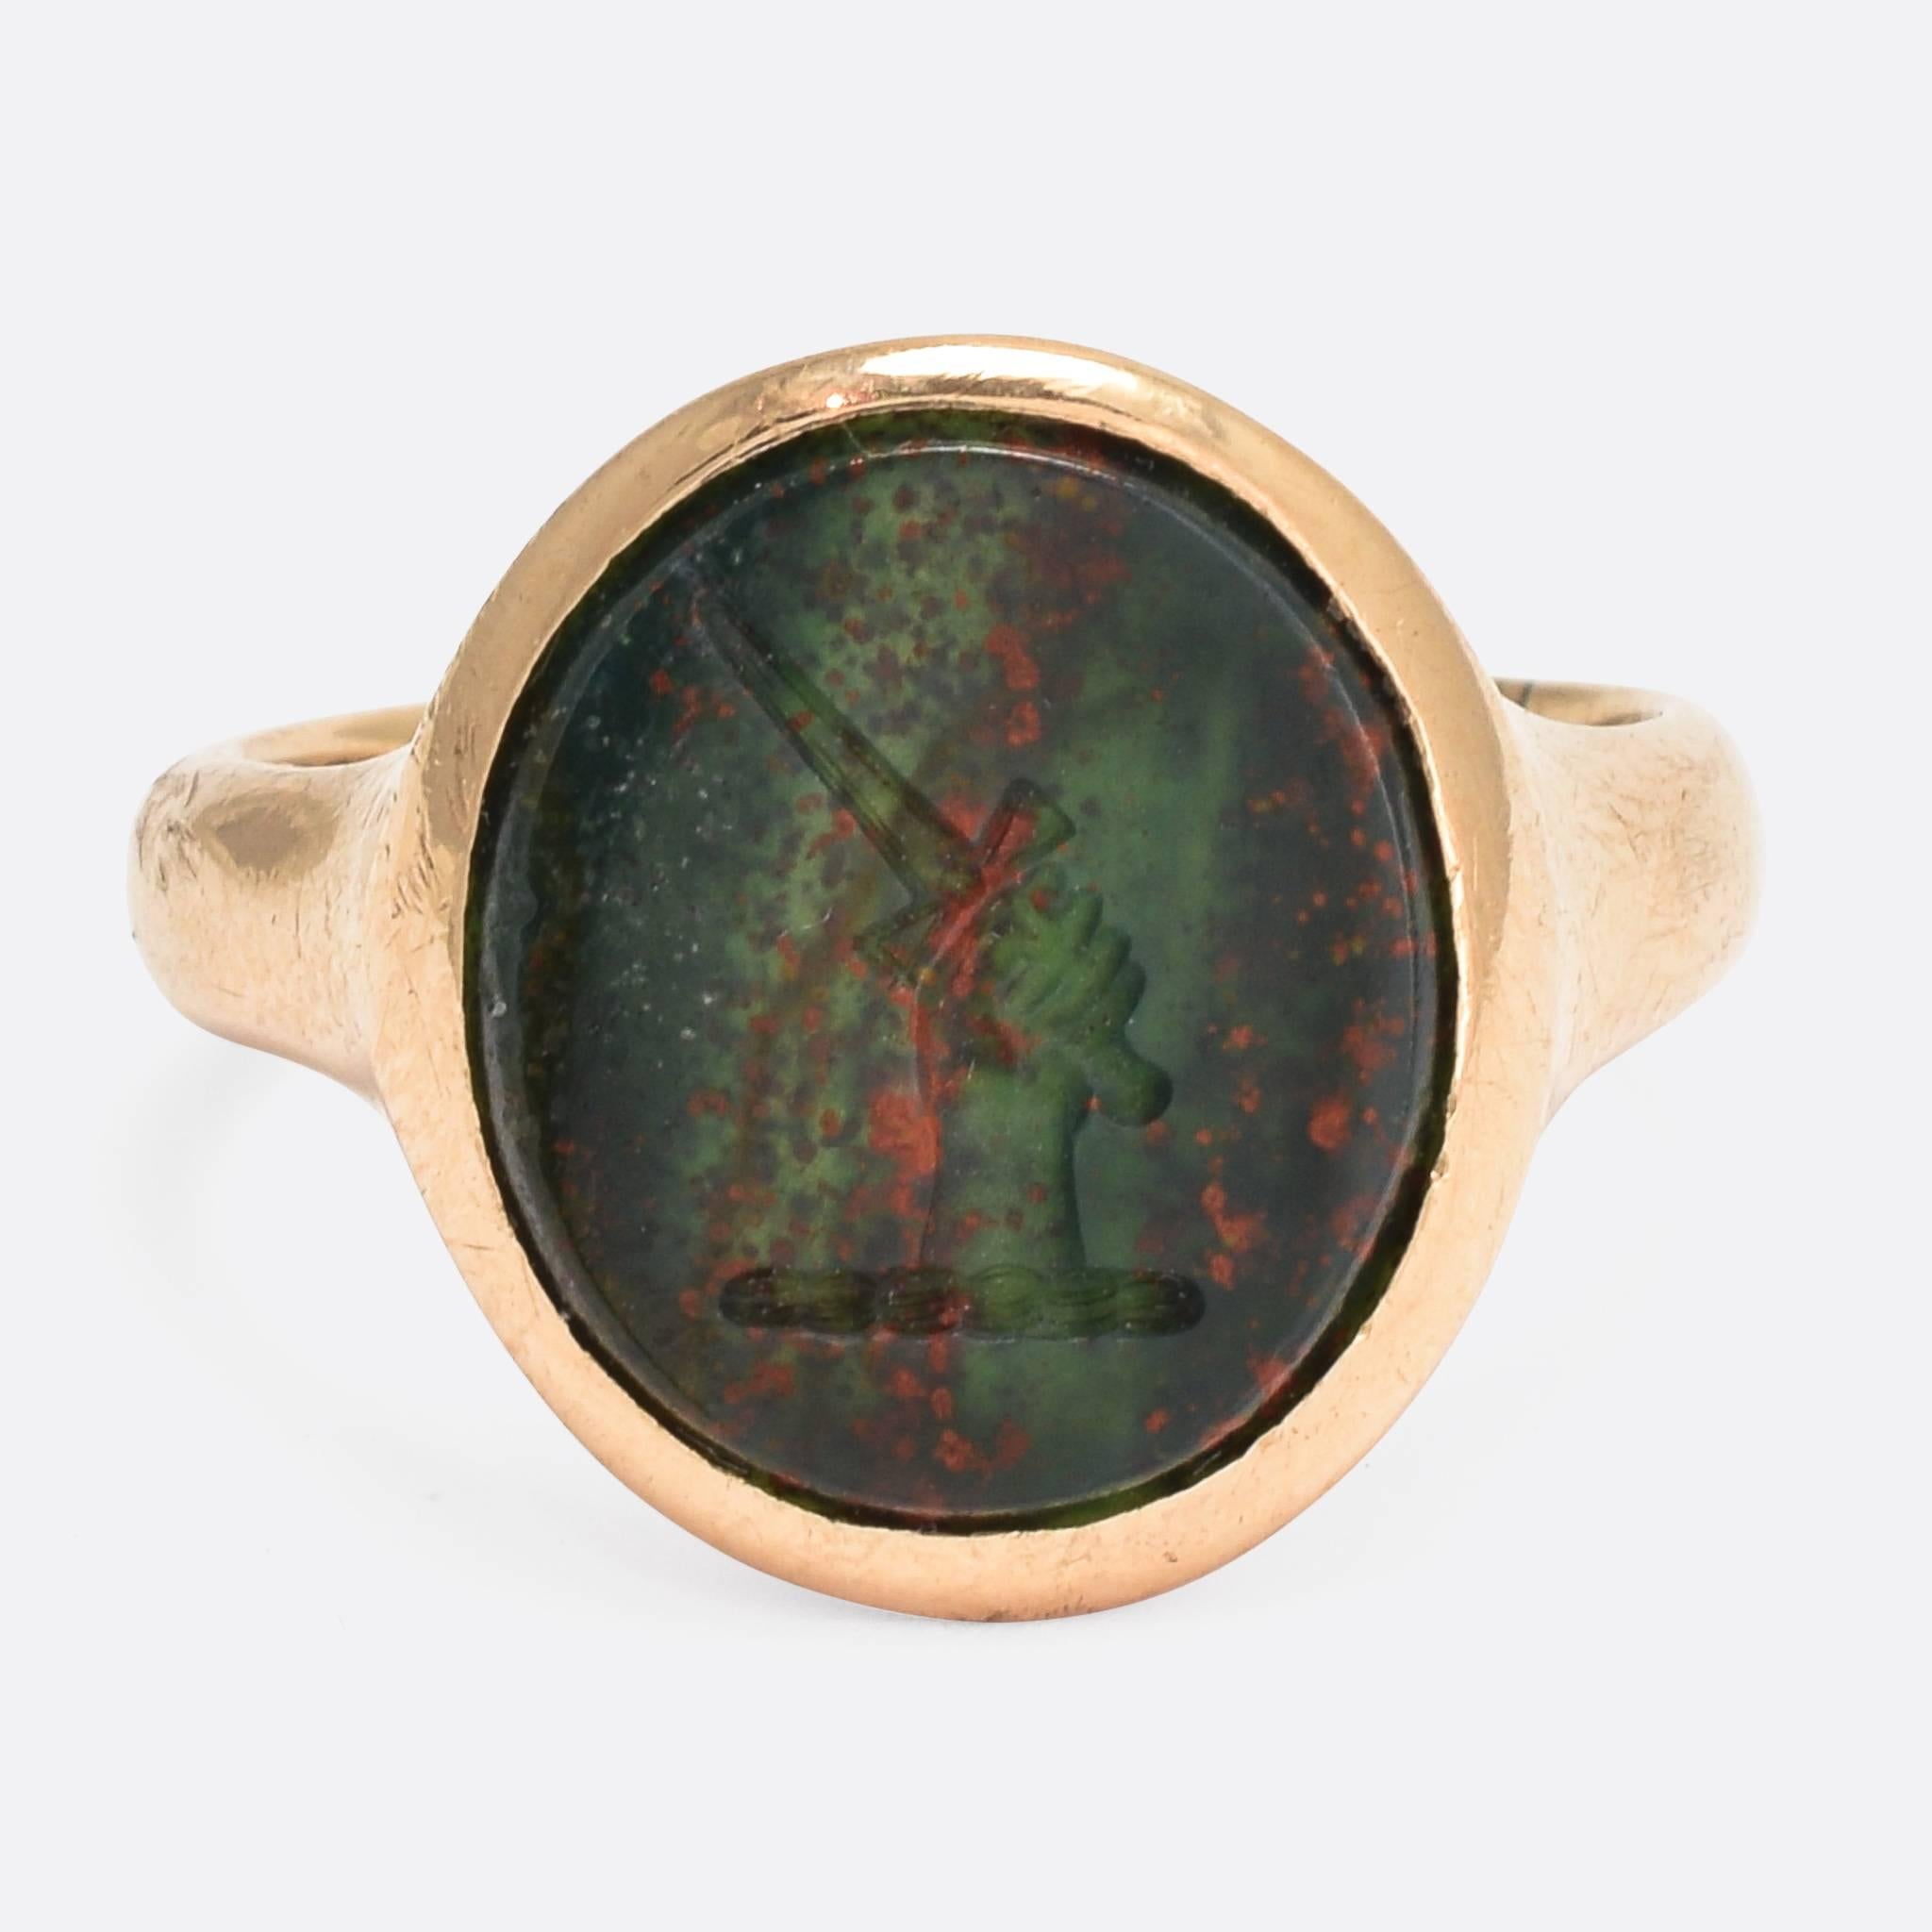 This cool antique signet ring features a heraldic intaglio crest, carved into an oval bloodstone panel. The crest is described by Faibairn as 